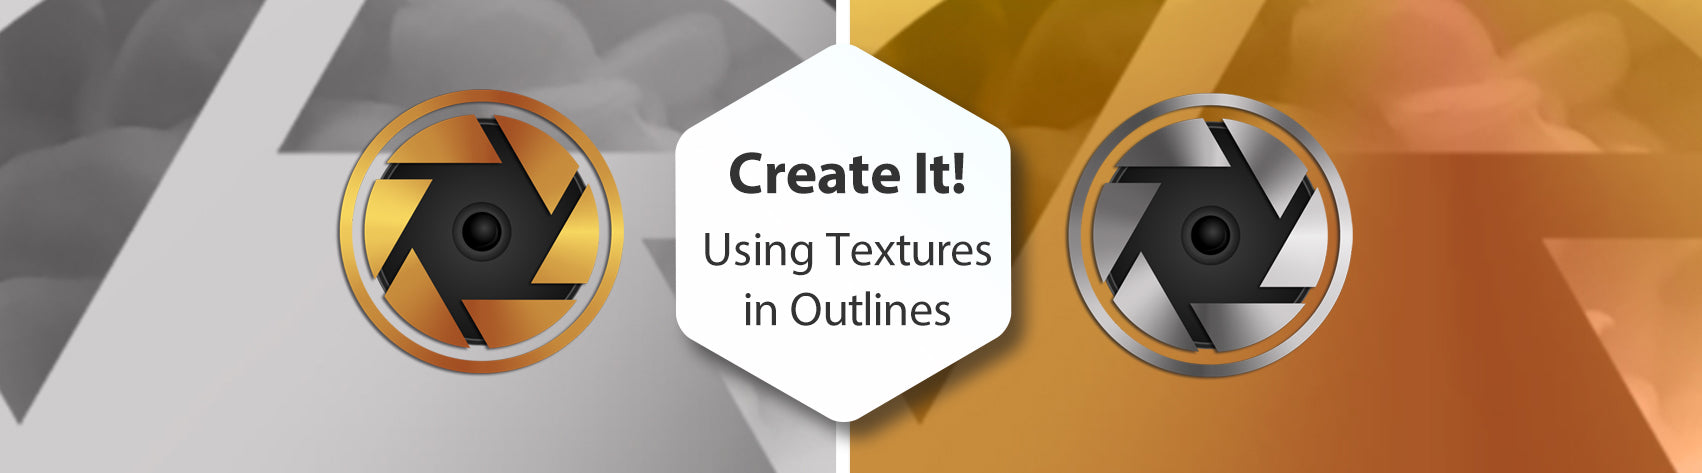 Create It! - Using Textures in Outlines